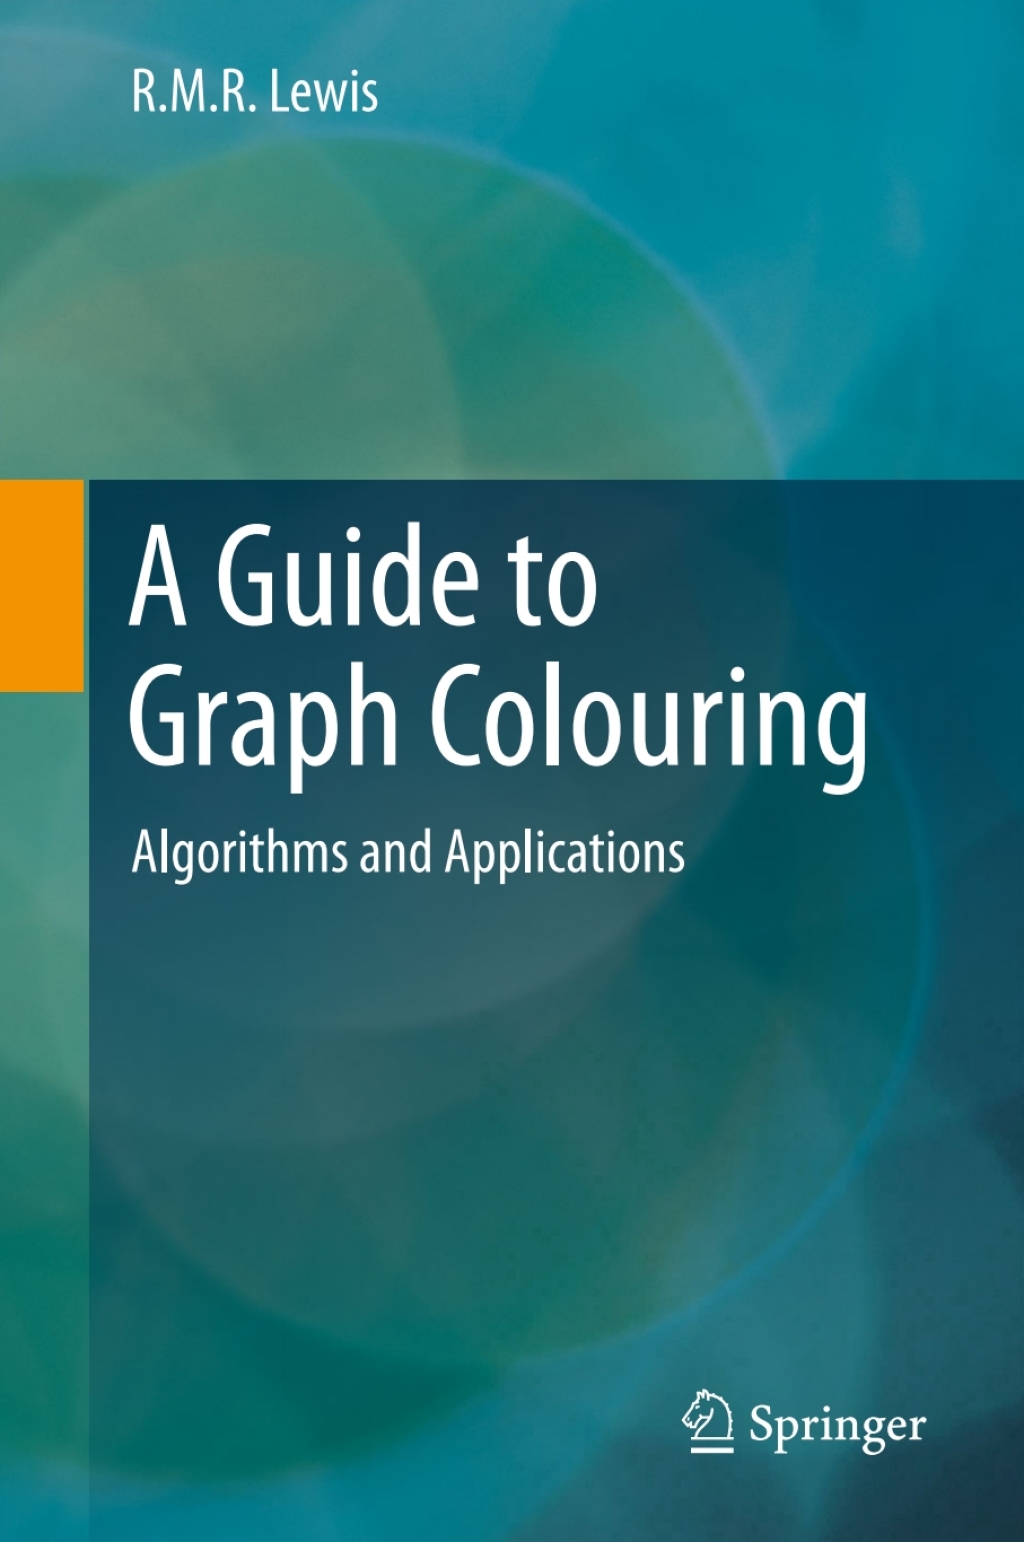 A Guide to Graph Colouring (eBook) - R.M.R. Lewis,